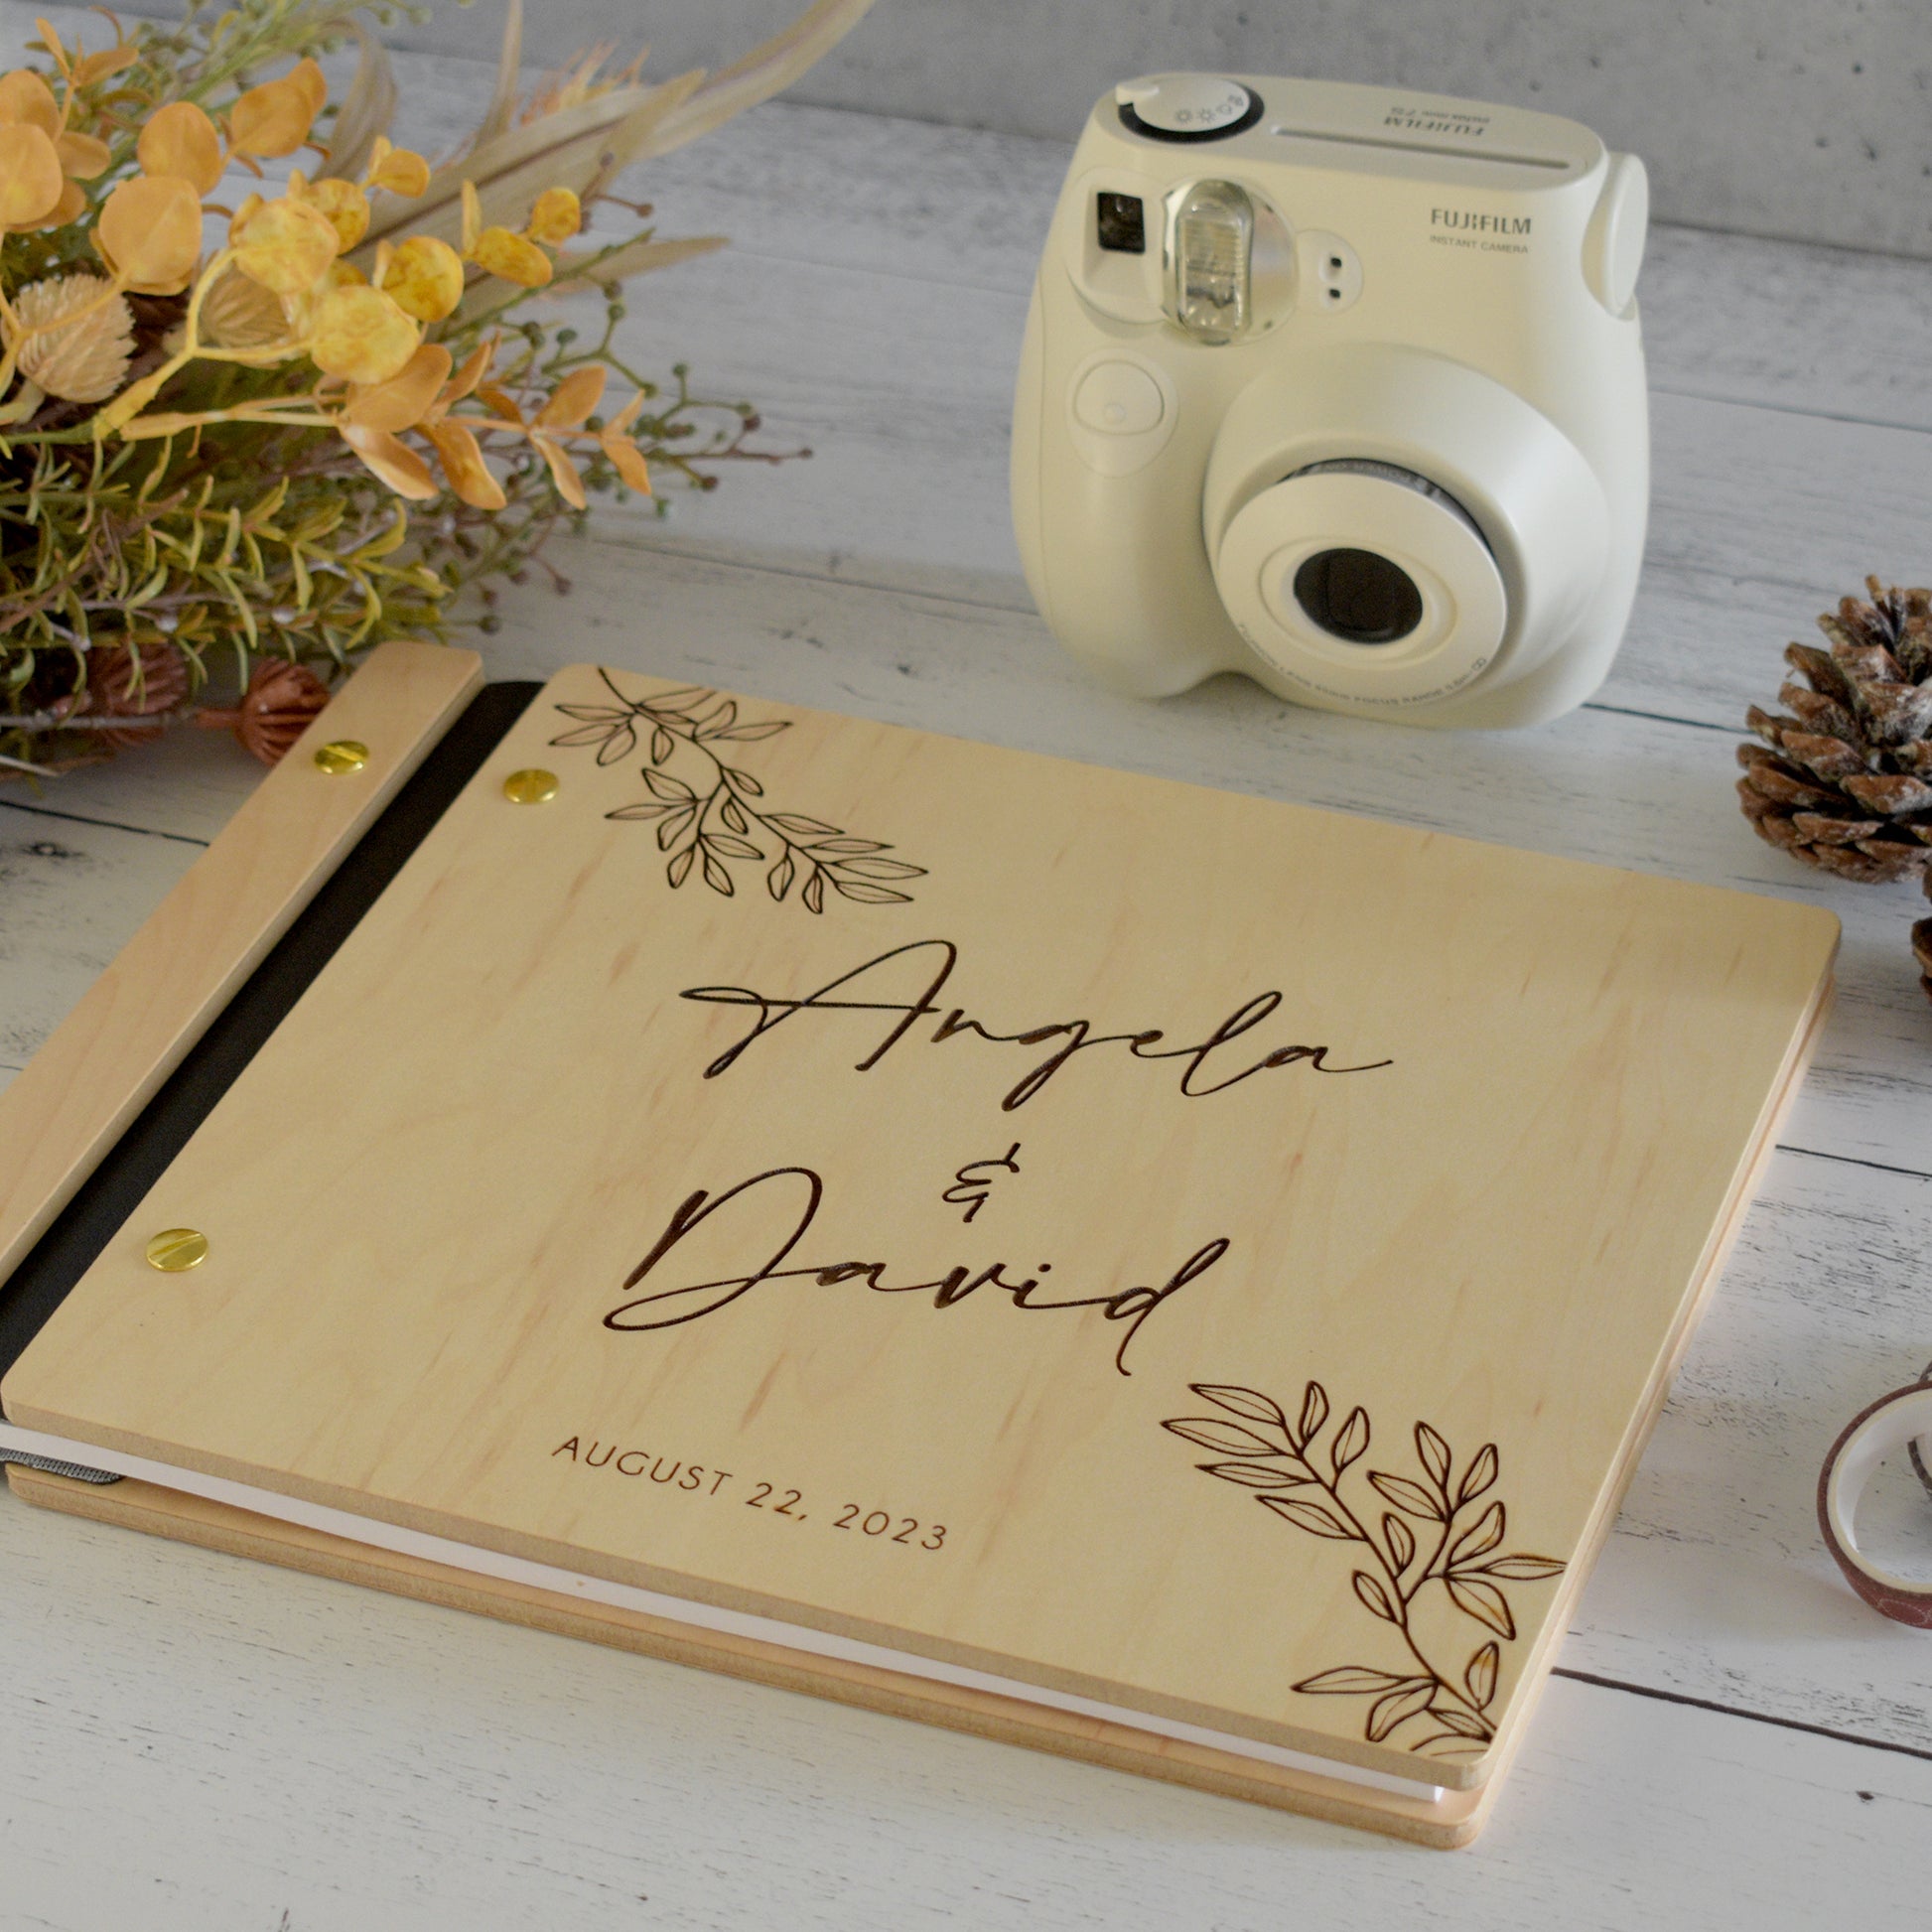 An 8.5x11" guest book lies on a table. Made of maple wood, black vegan leather binding, and gold hardware. The front cover has engravings of florals and reads Angela & David, August 22, 2023.